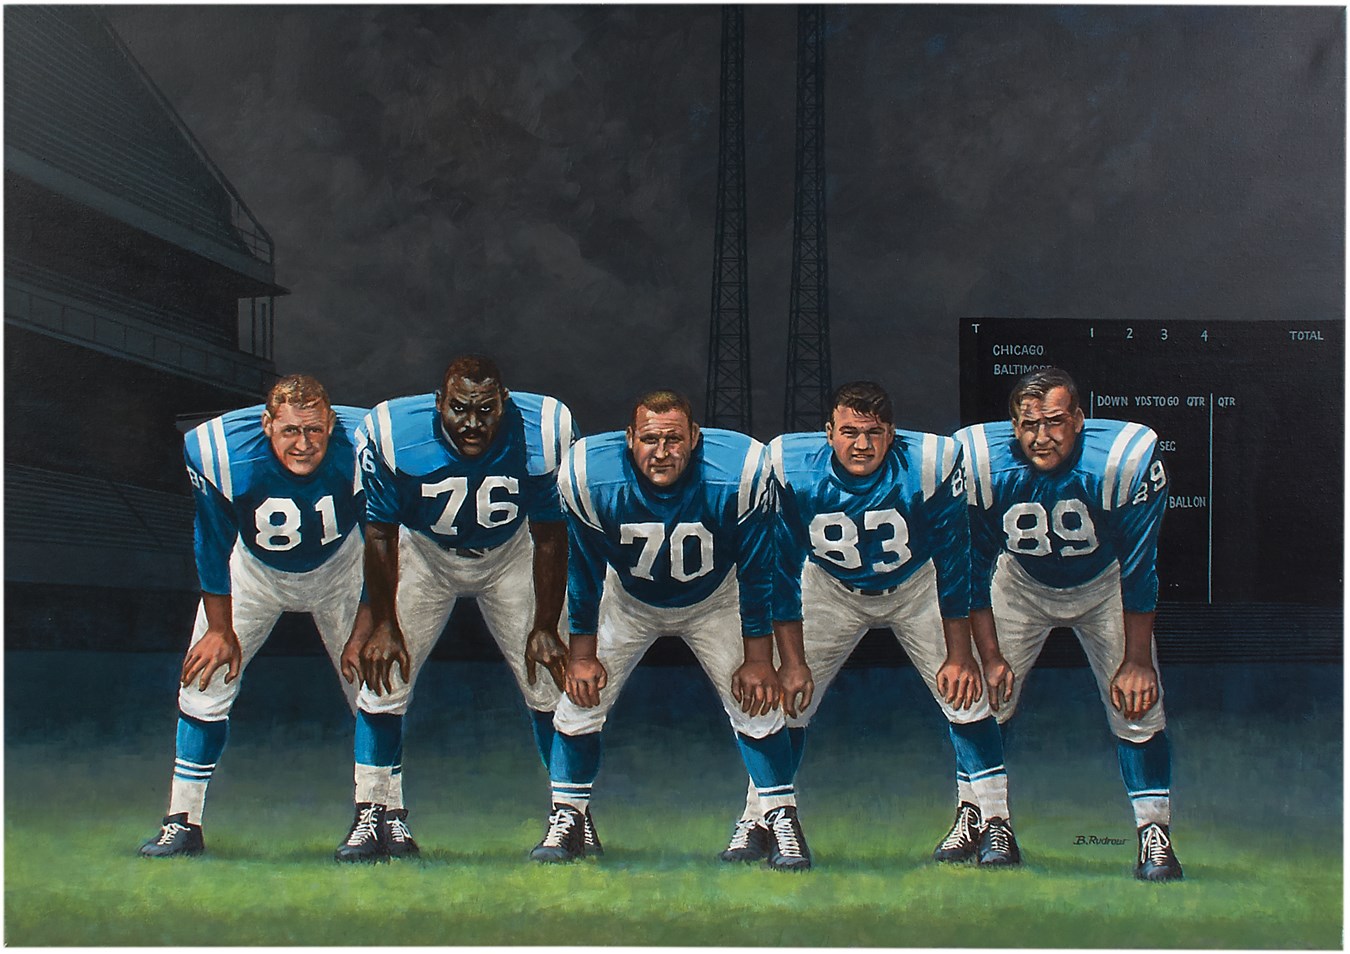 1958 "Greatest Game Ever Played" Baltimore Colts Defensive Line Oil on Canvas by Bill Rudrow